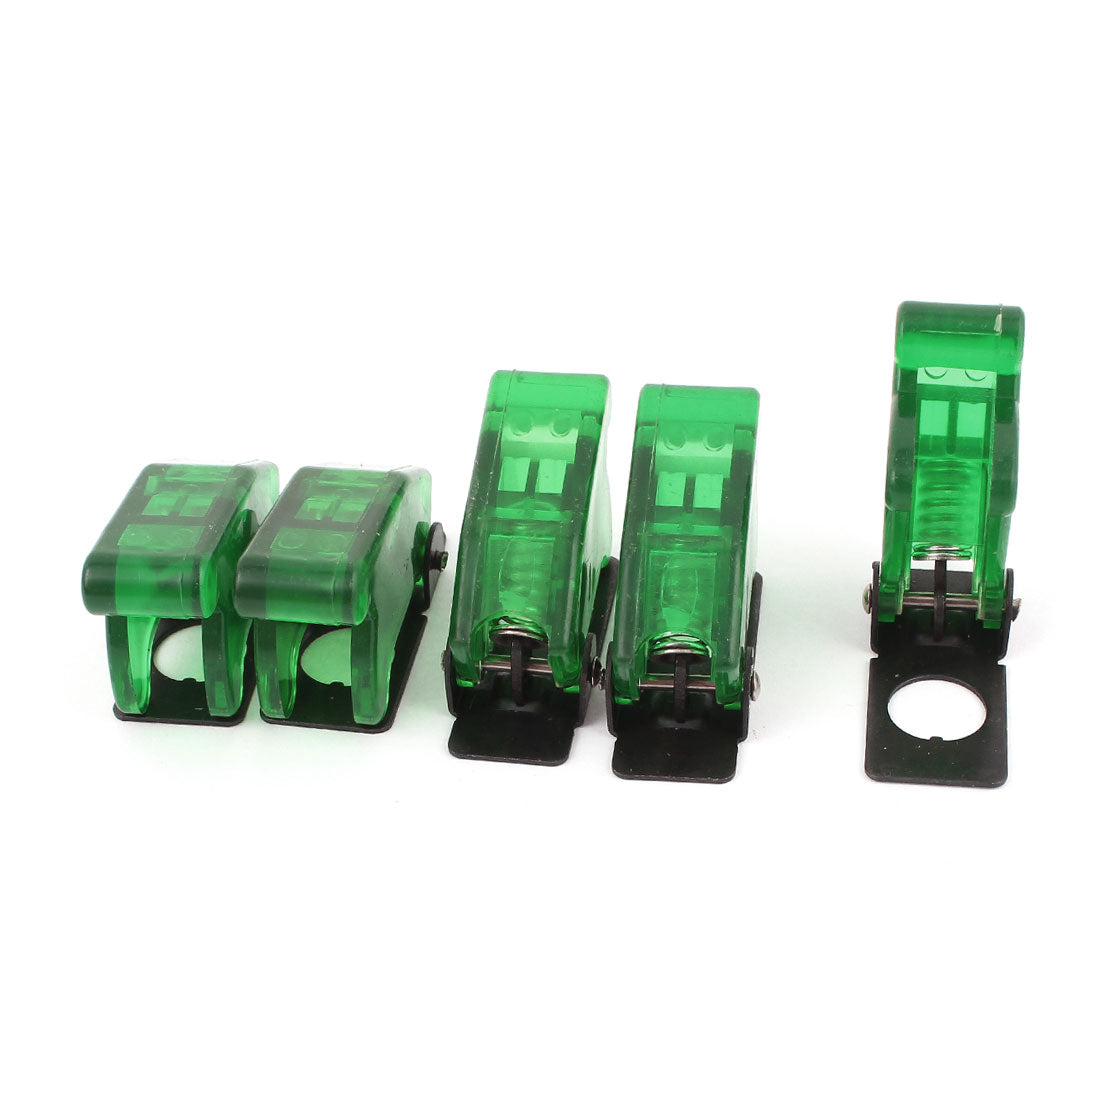 uxcell Uxcell 5Pcs Green Waterproof Toggle Switch Cover Flip Safety Protection Cap 12mm